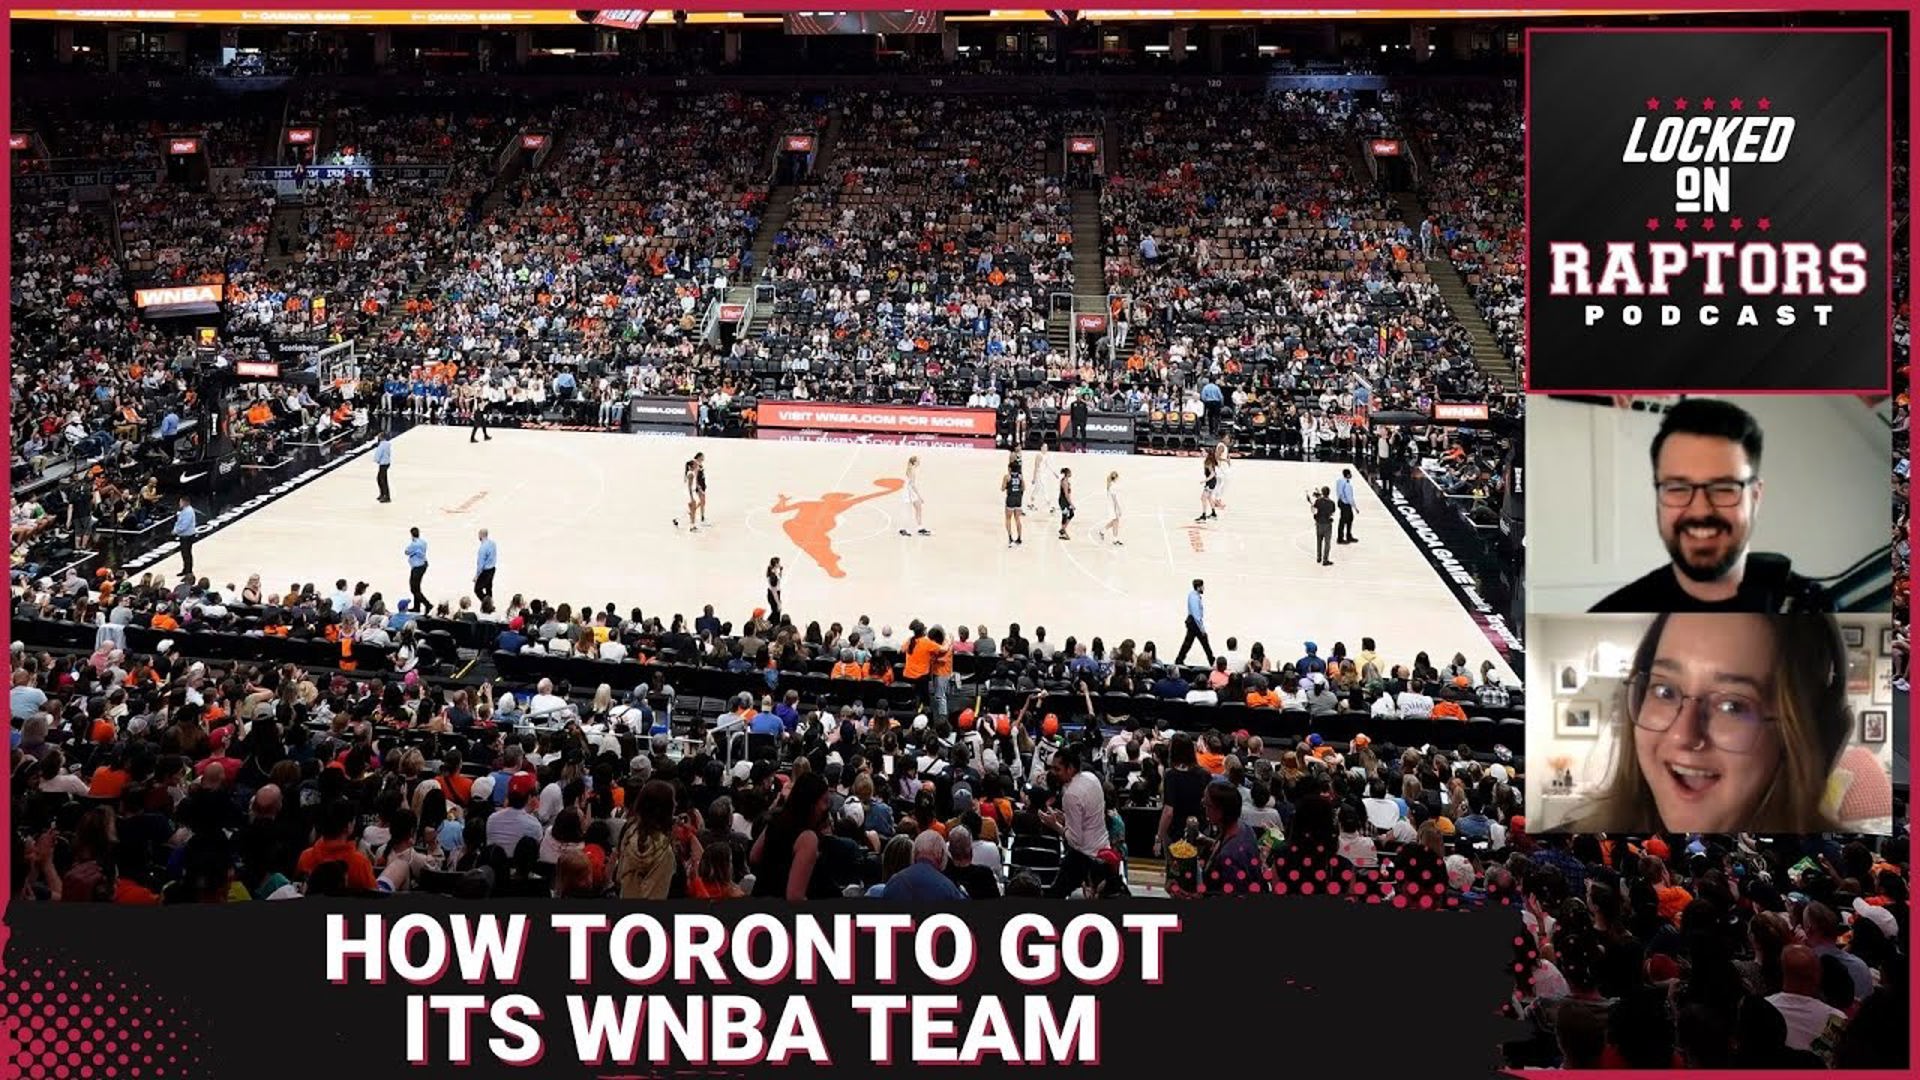 In Episode 1639, Sean Woodley is joined by Chelsea Leite (Raptors HQ) to talk about Toronto landing a WNBA expansion franchise